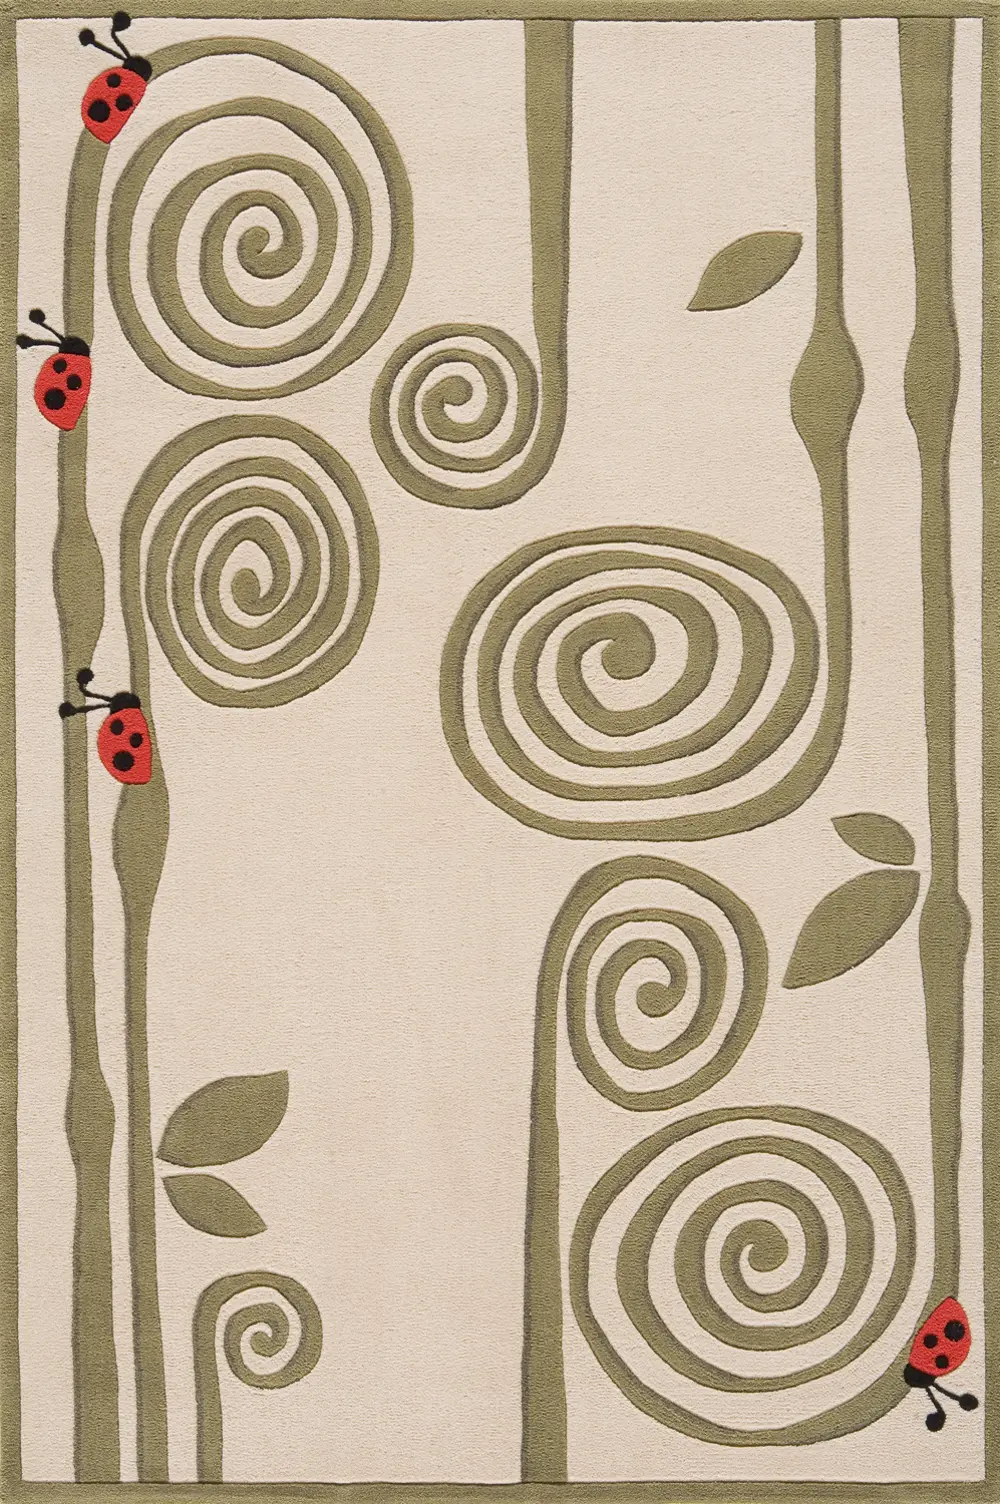 5 x 7 Medium Curly Fern Ivory and Green Area Rug - Whimsy Garden-1